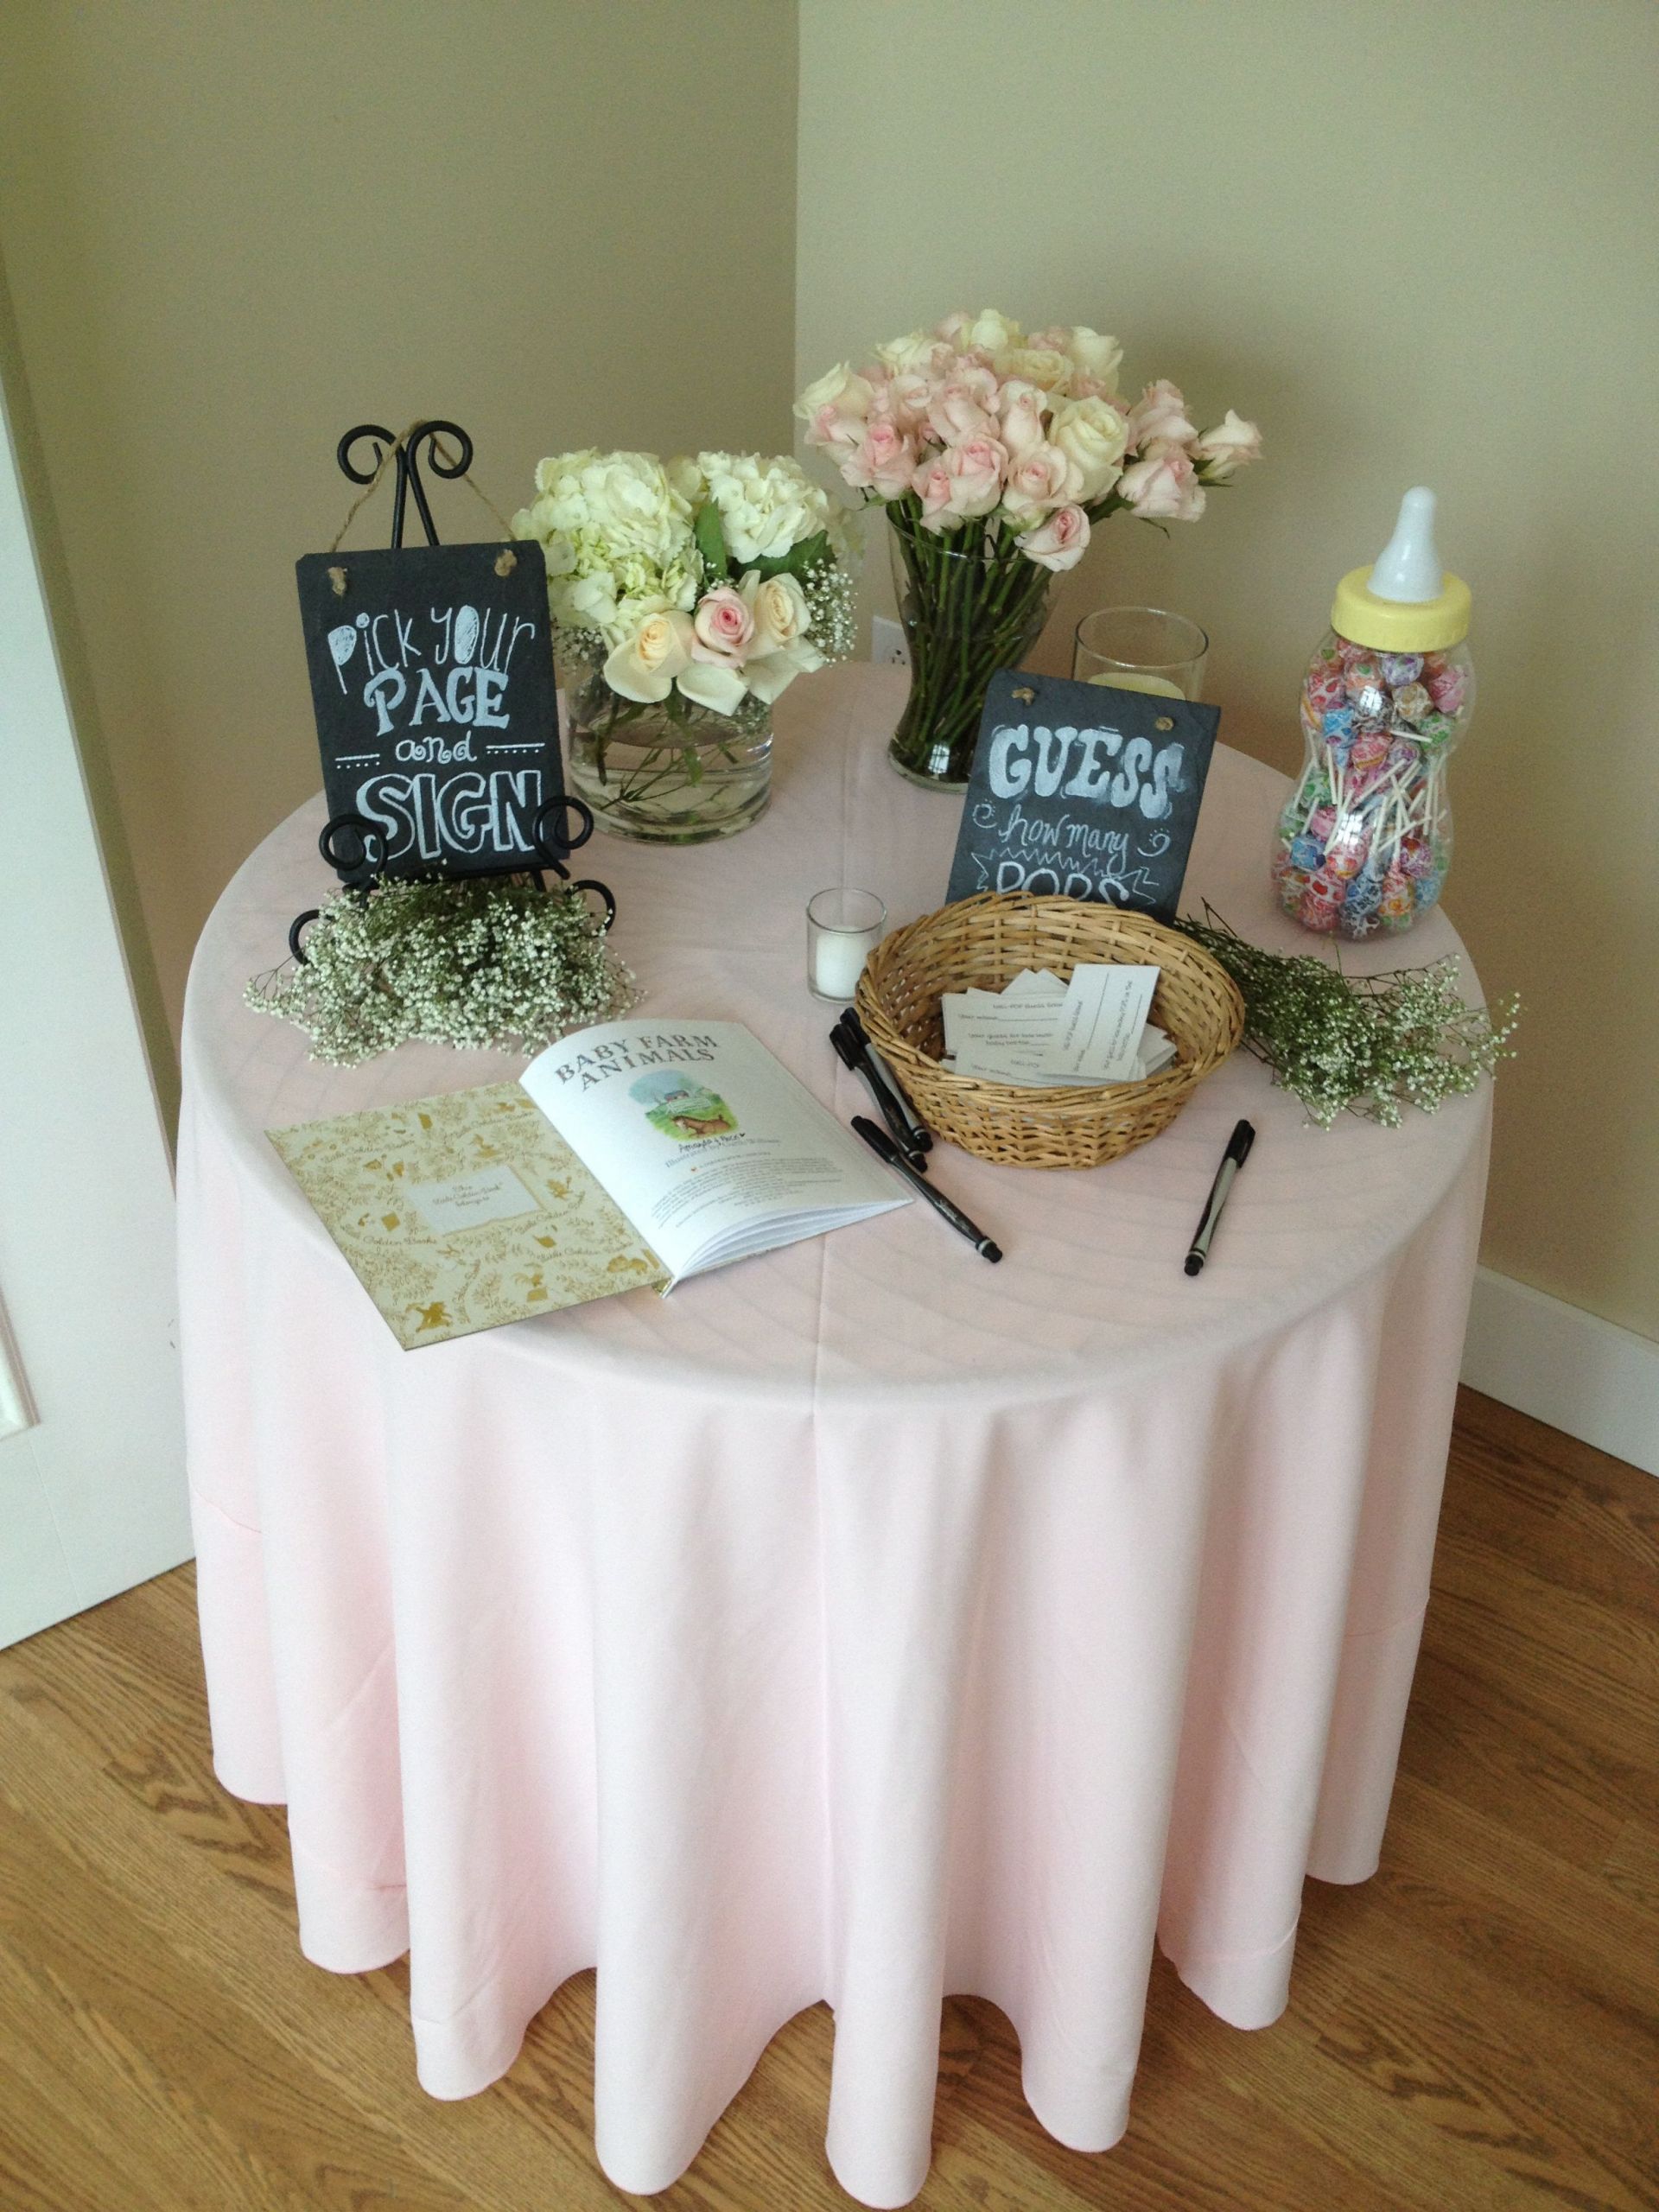 Gift Table Ideas For Baby Shower
 Entrance Table at a baby shower Our Events